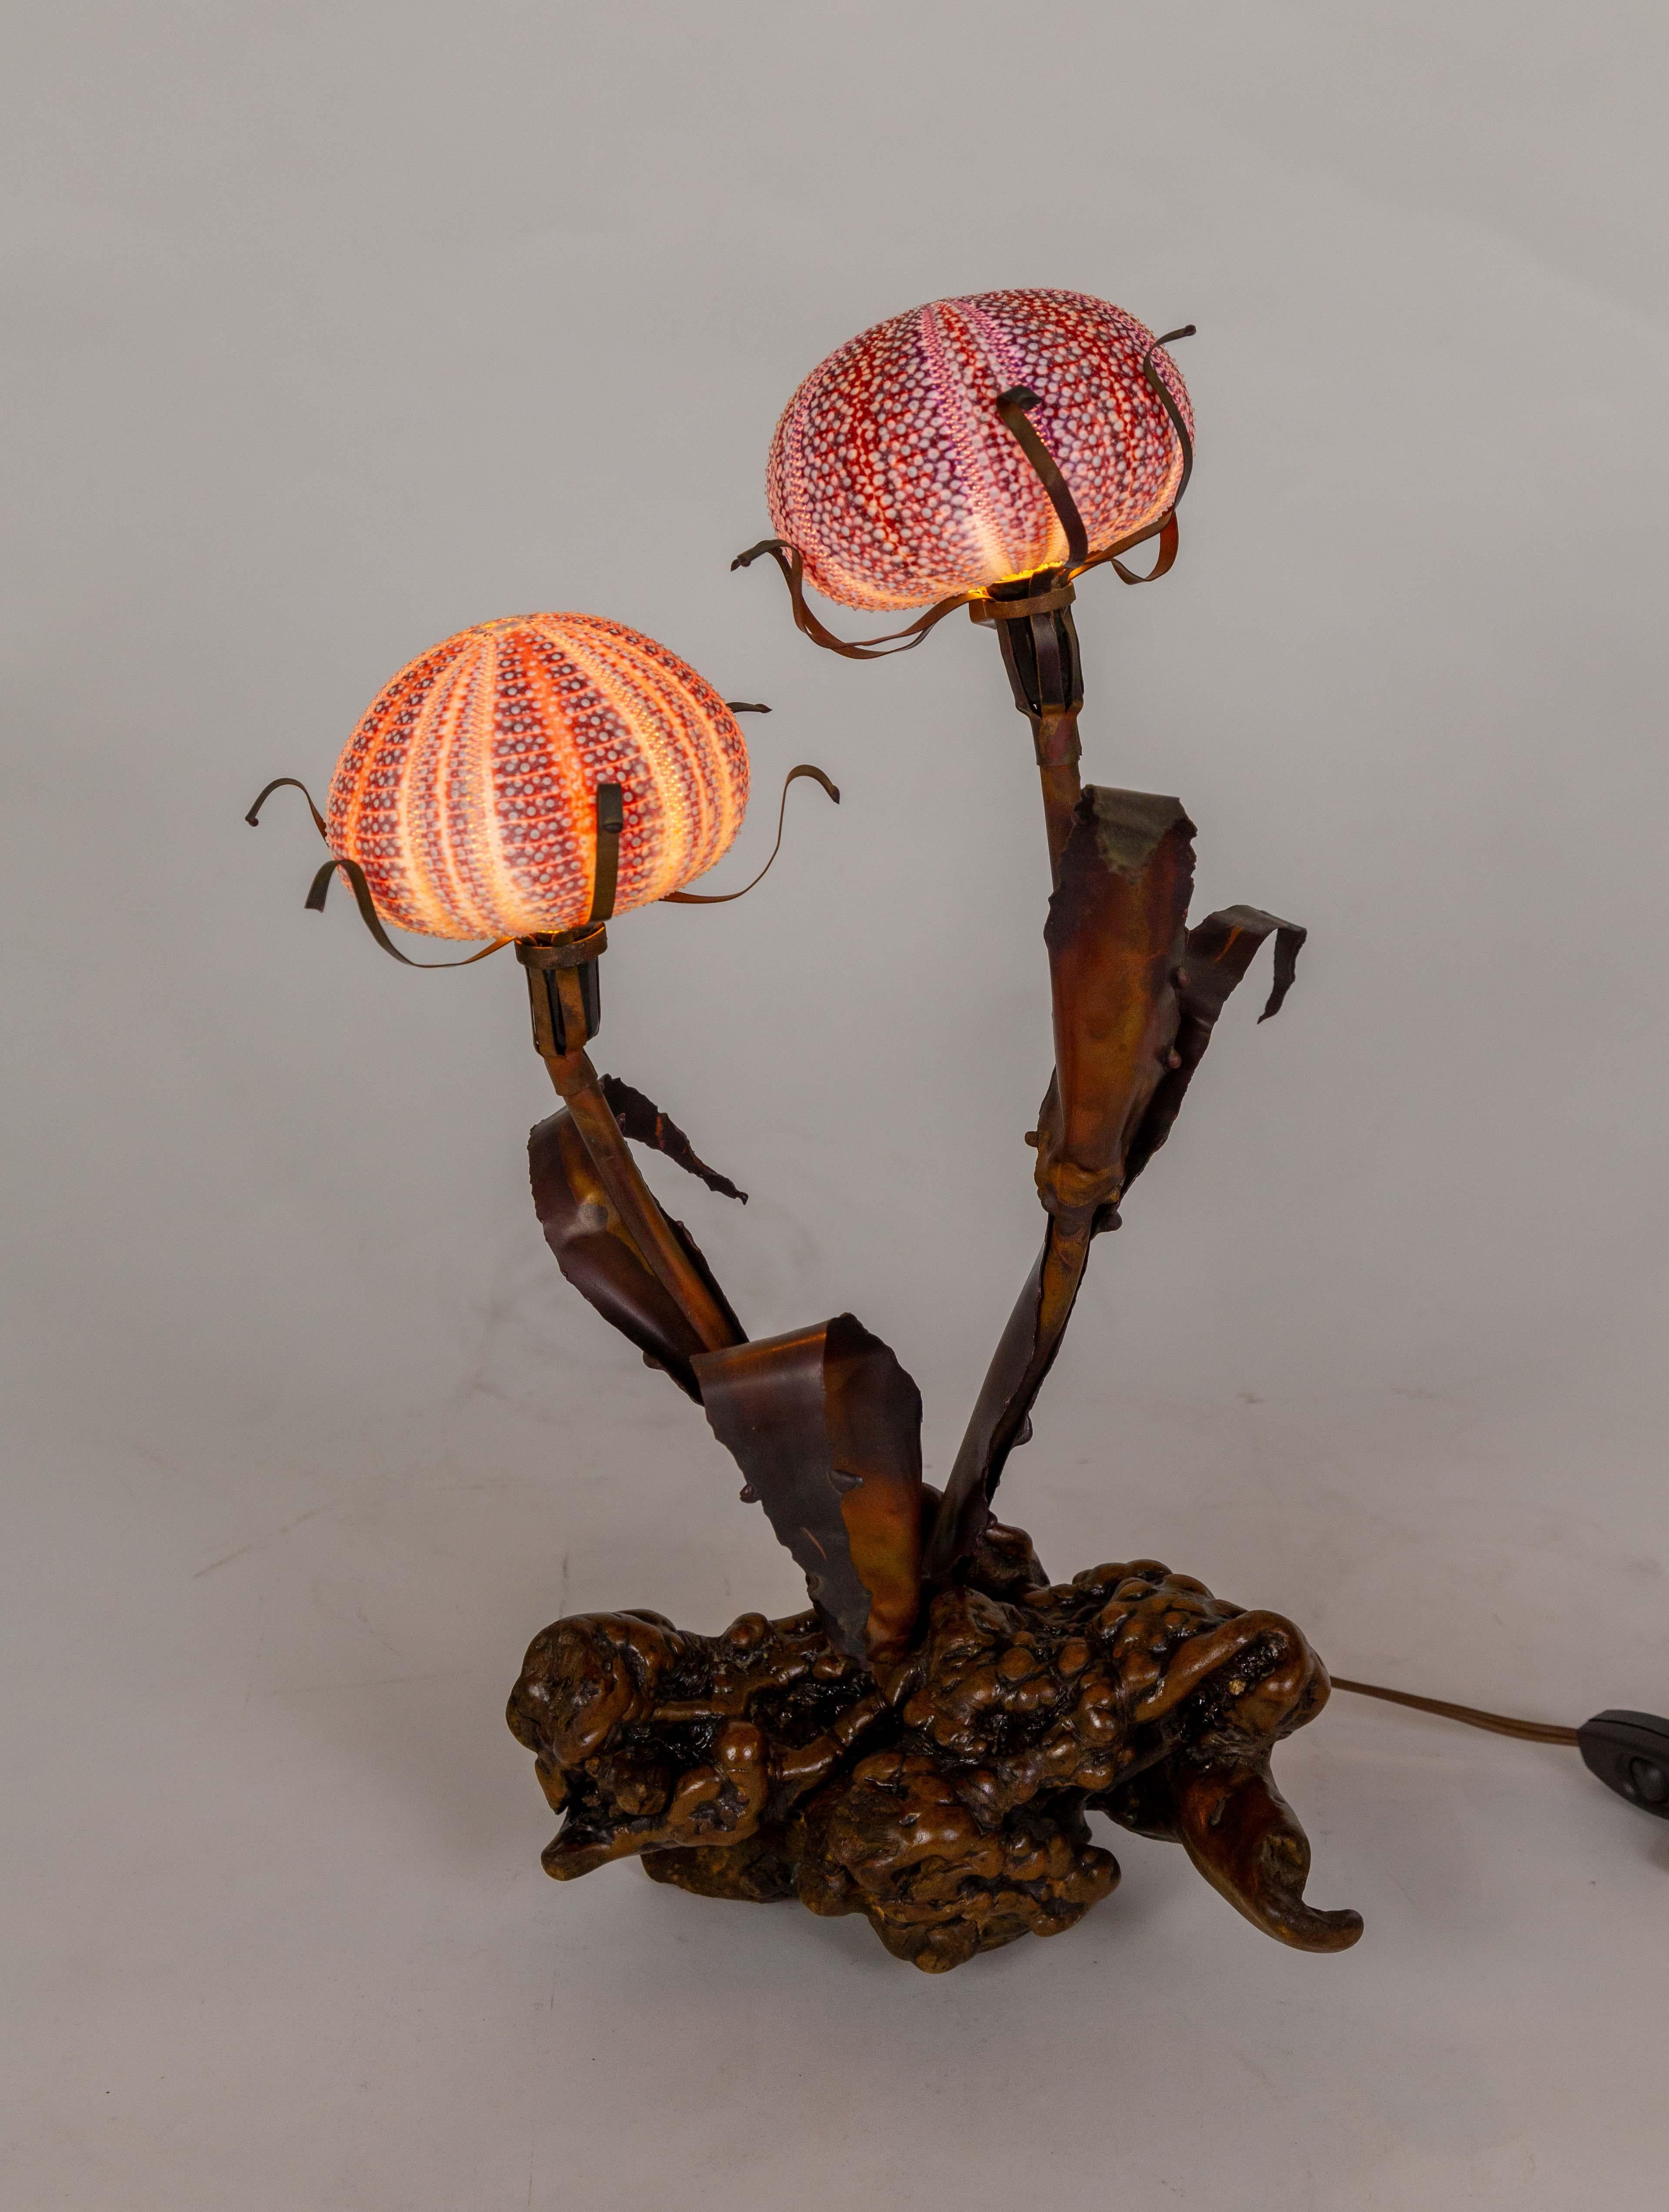 A sculptural table lamp with a burl wood base, copper leaves, and stems holding two sea urchin shells. A beautifully organic design by Curtis Jere. The urchin shells act as shades for two lights that sit atop the stems with delicate copper S-curves